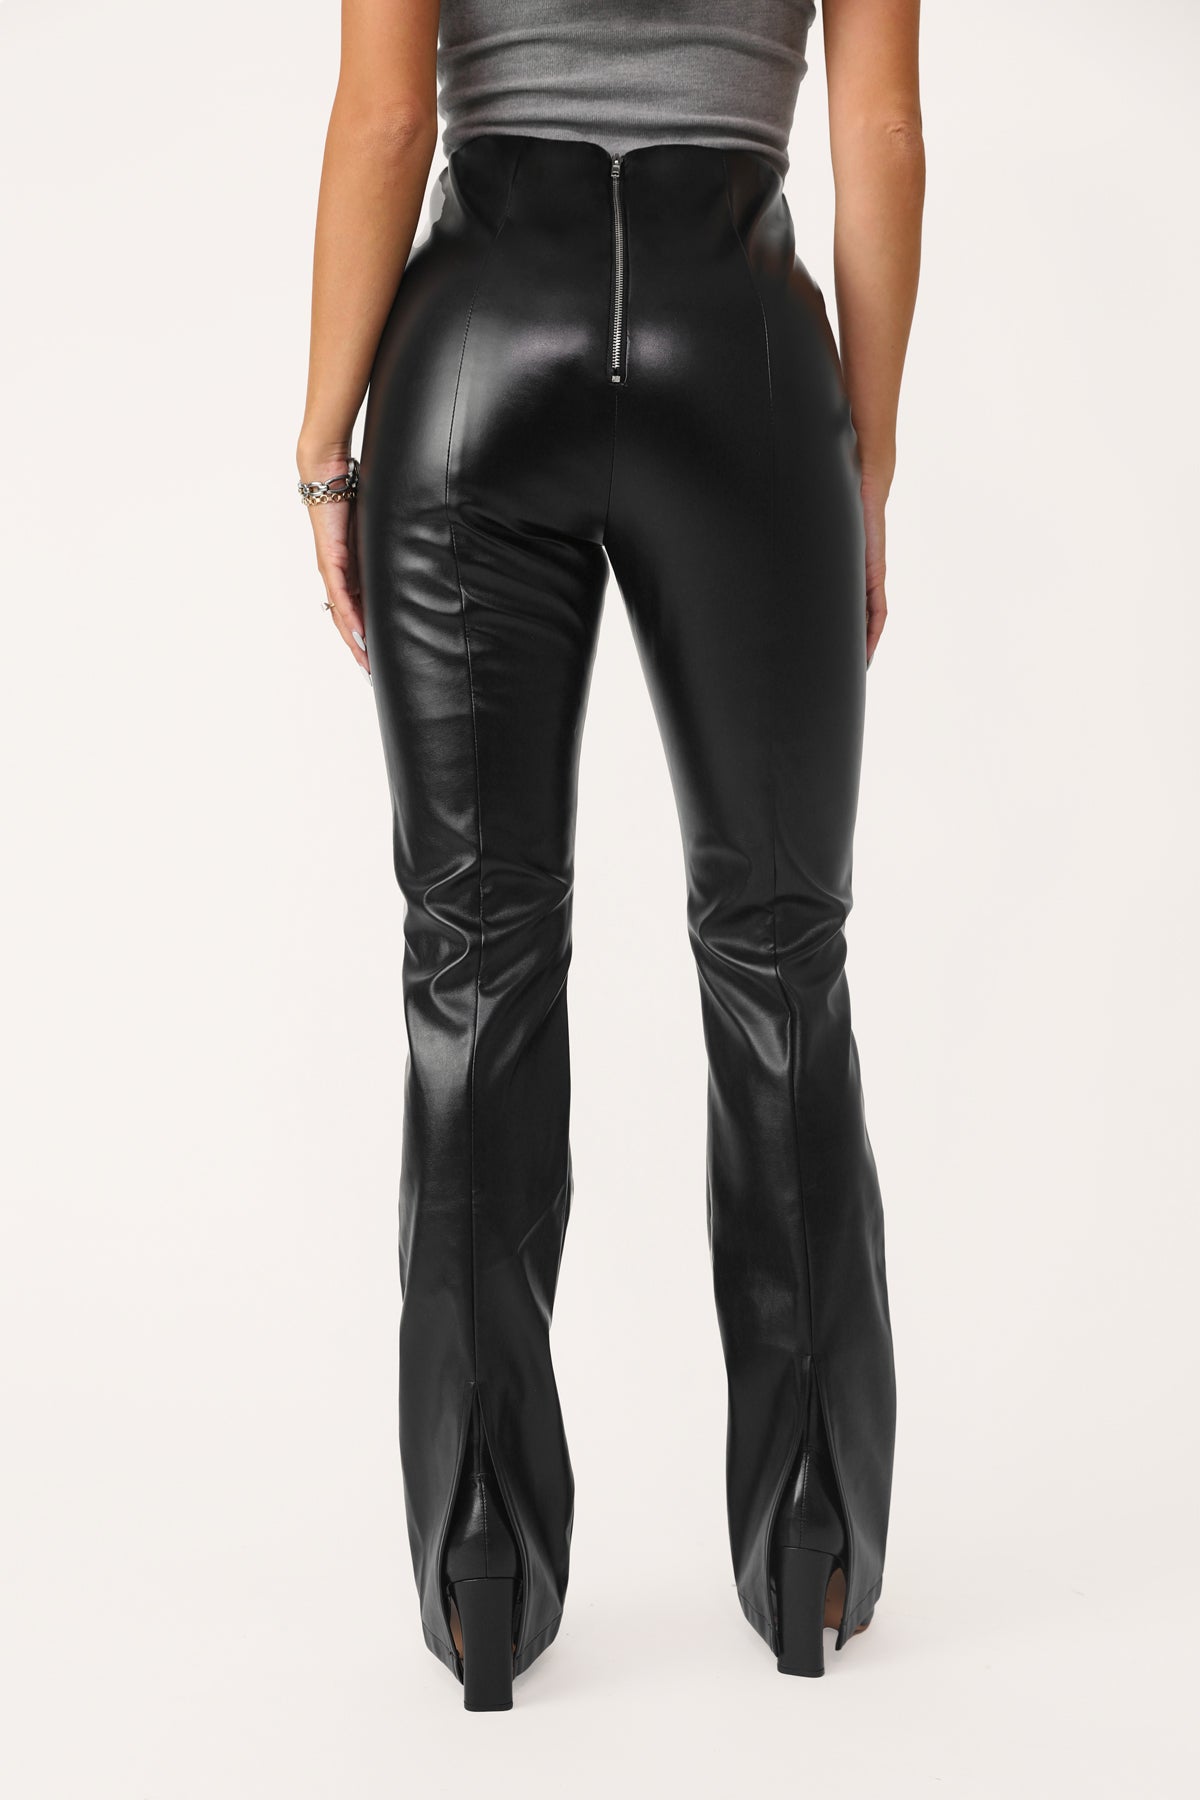 RIZZO BLACK FAUX LEATHER FLARE – PANT Kittenish